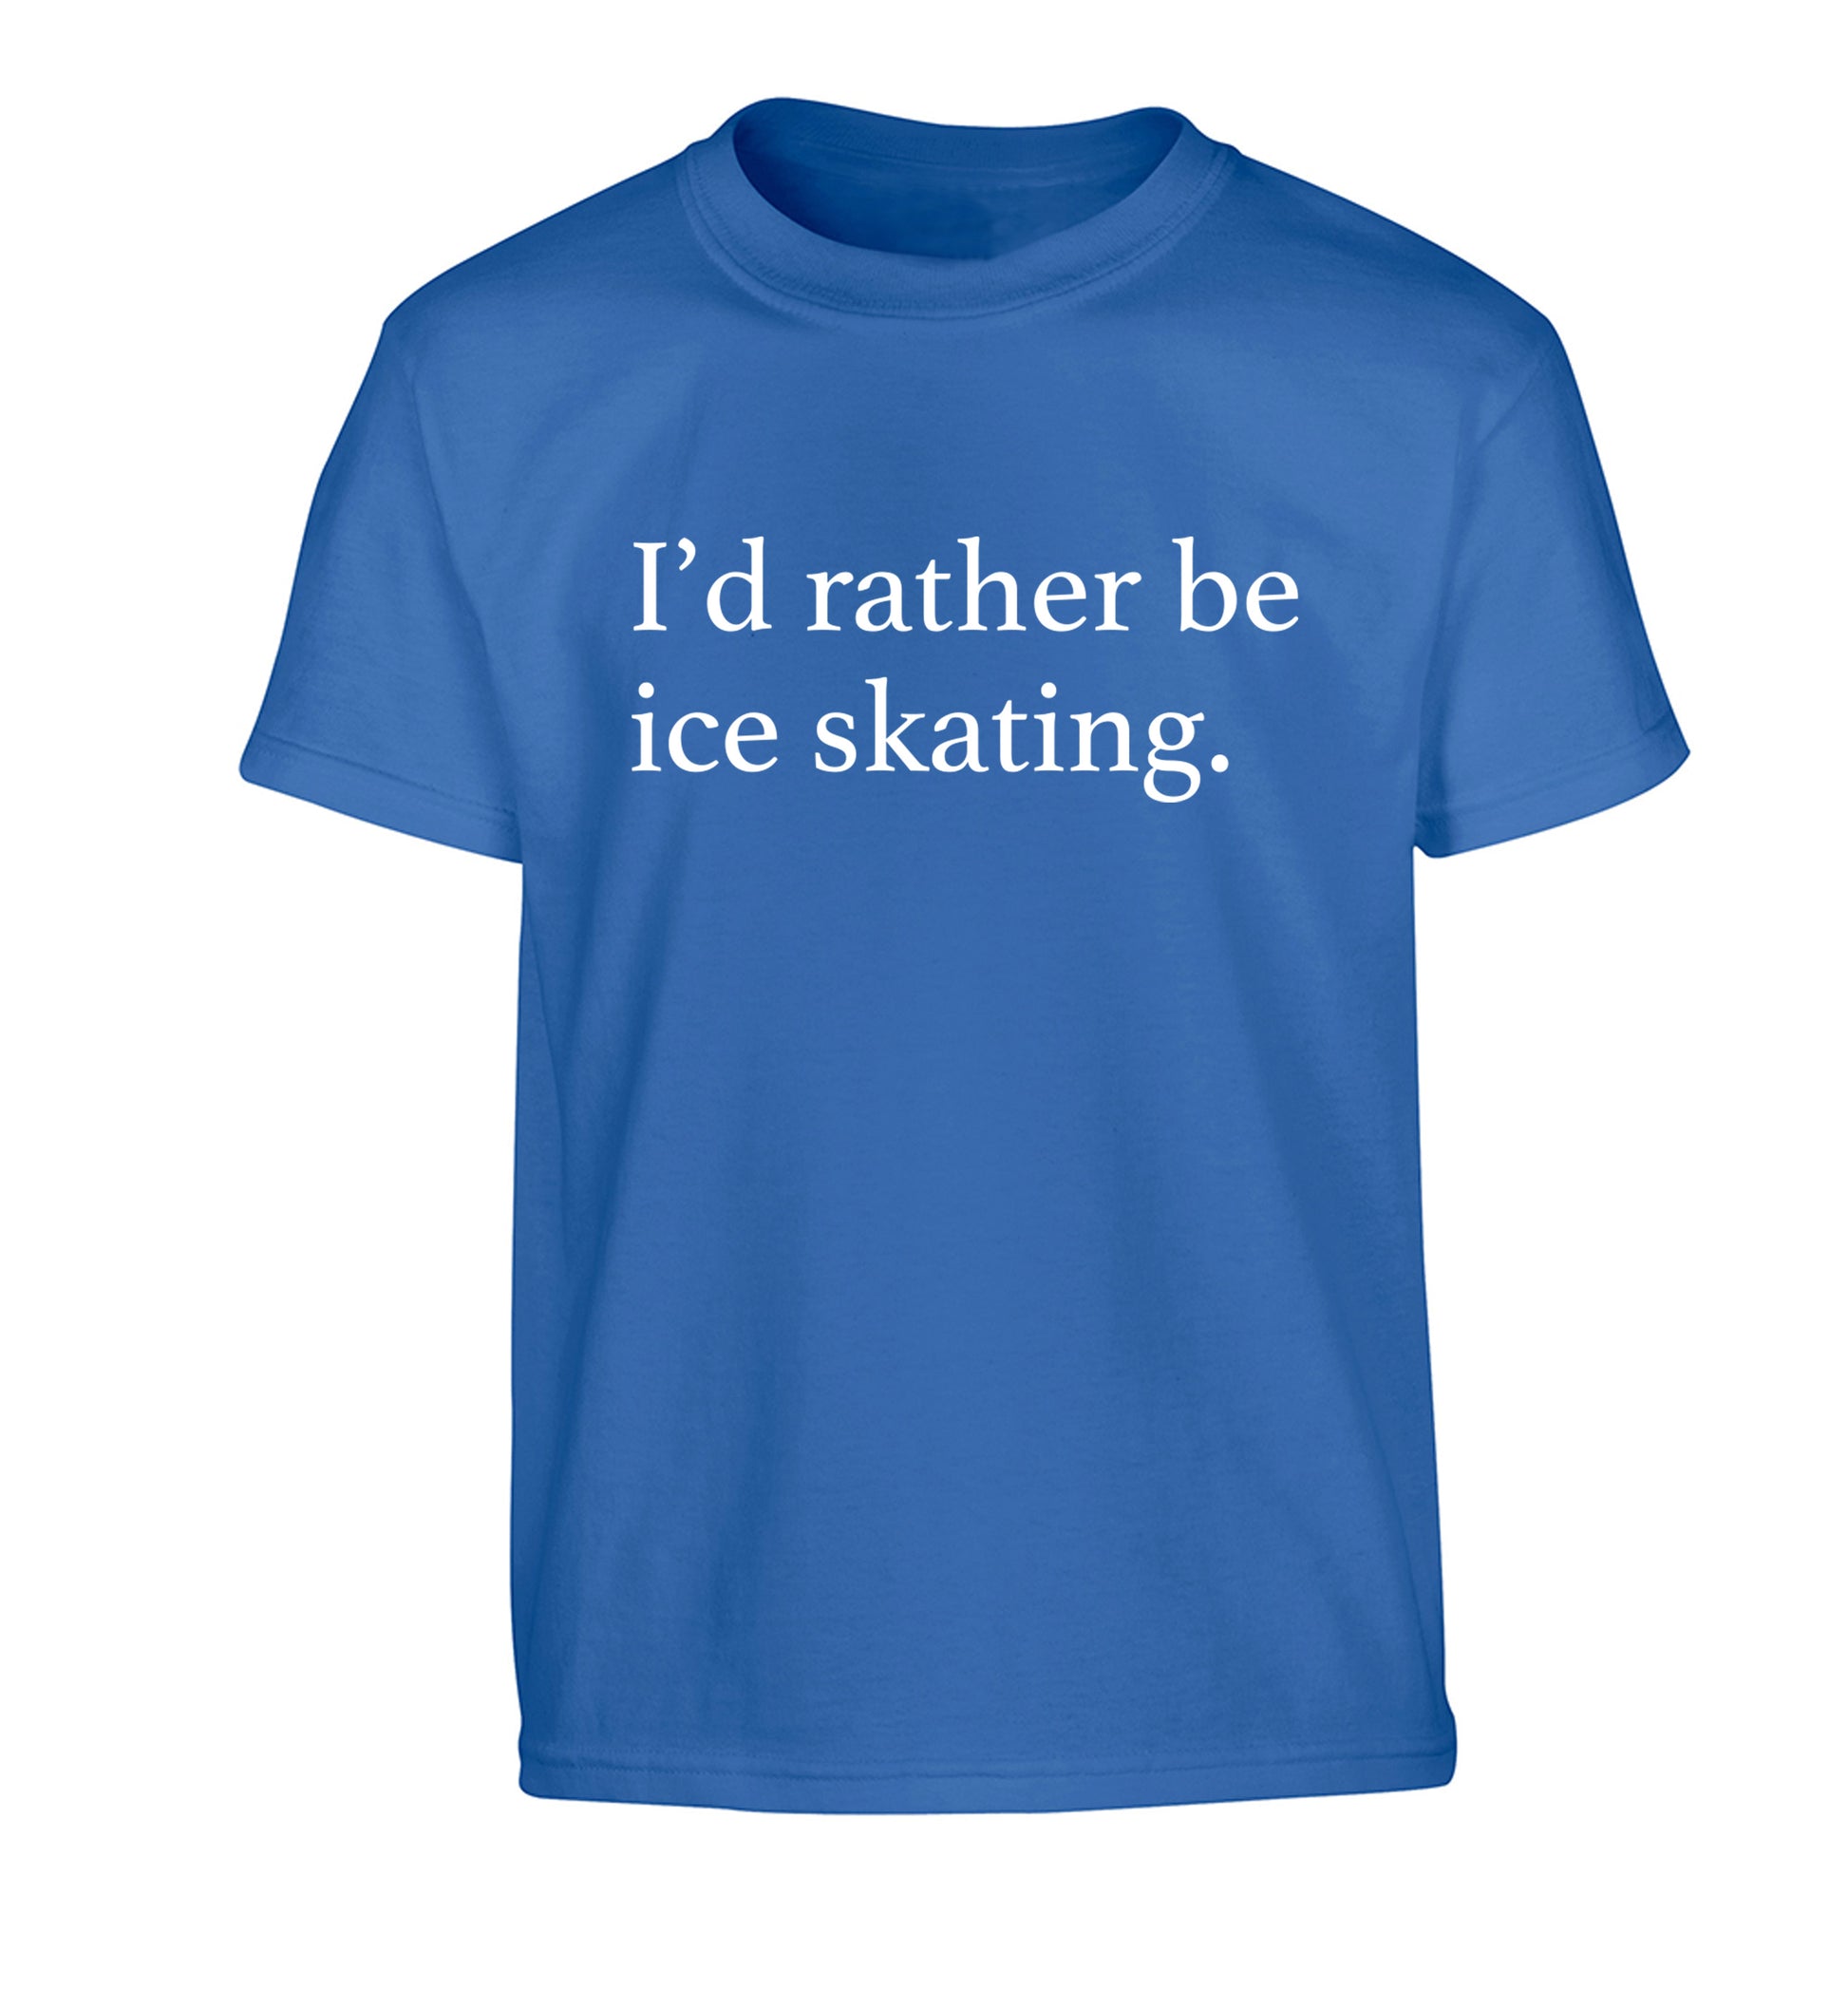 I'd rather be ice skating Children's blue Tshirt 12-14 Years